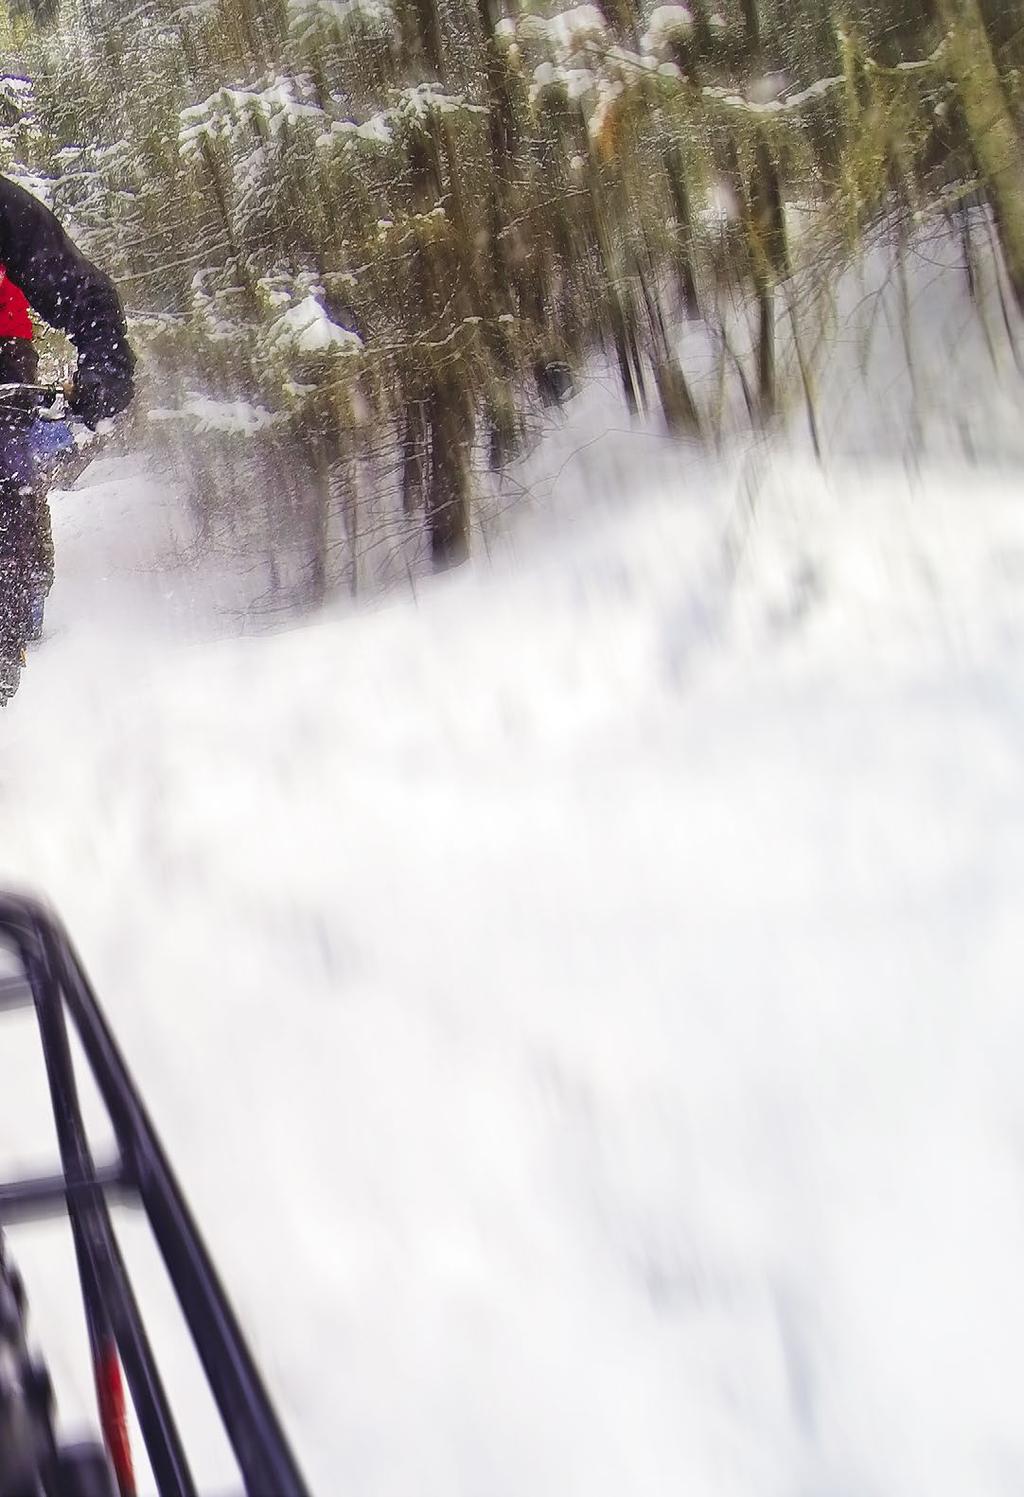 Rolling on extra-wide, low-pressure tires, bikers zip through the woods on snow-covered trails.